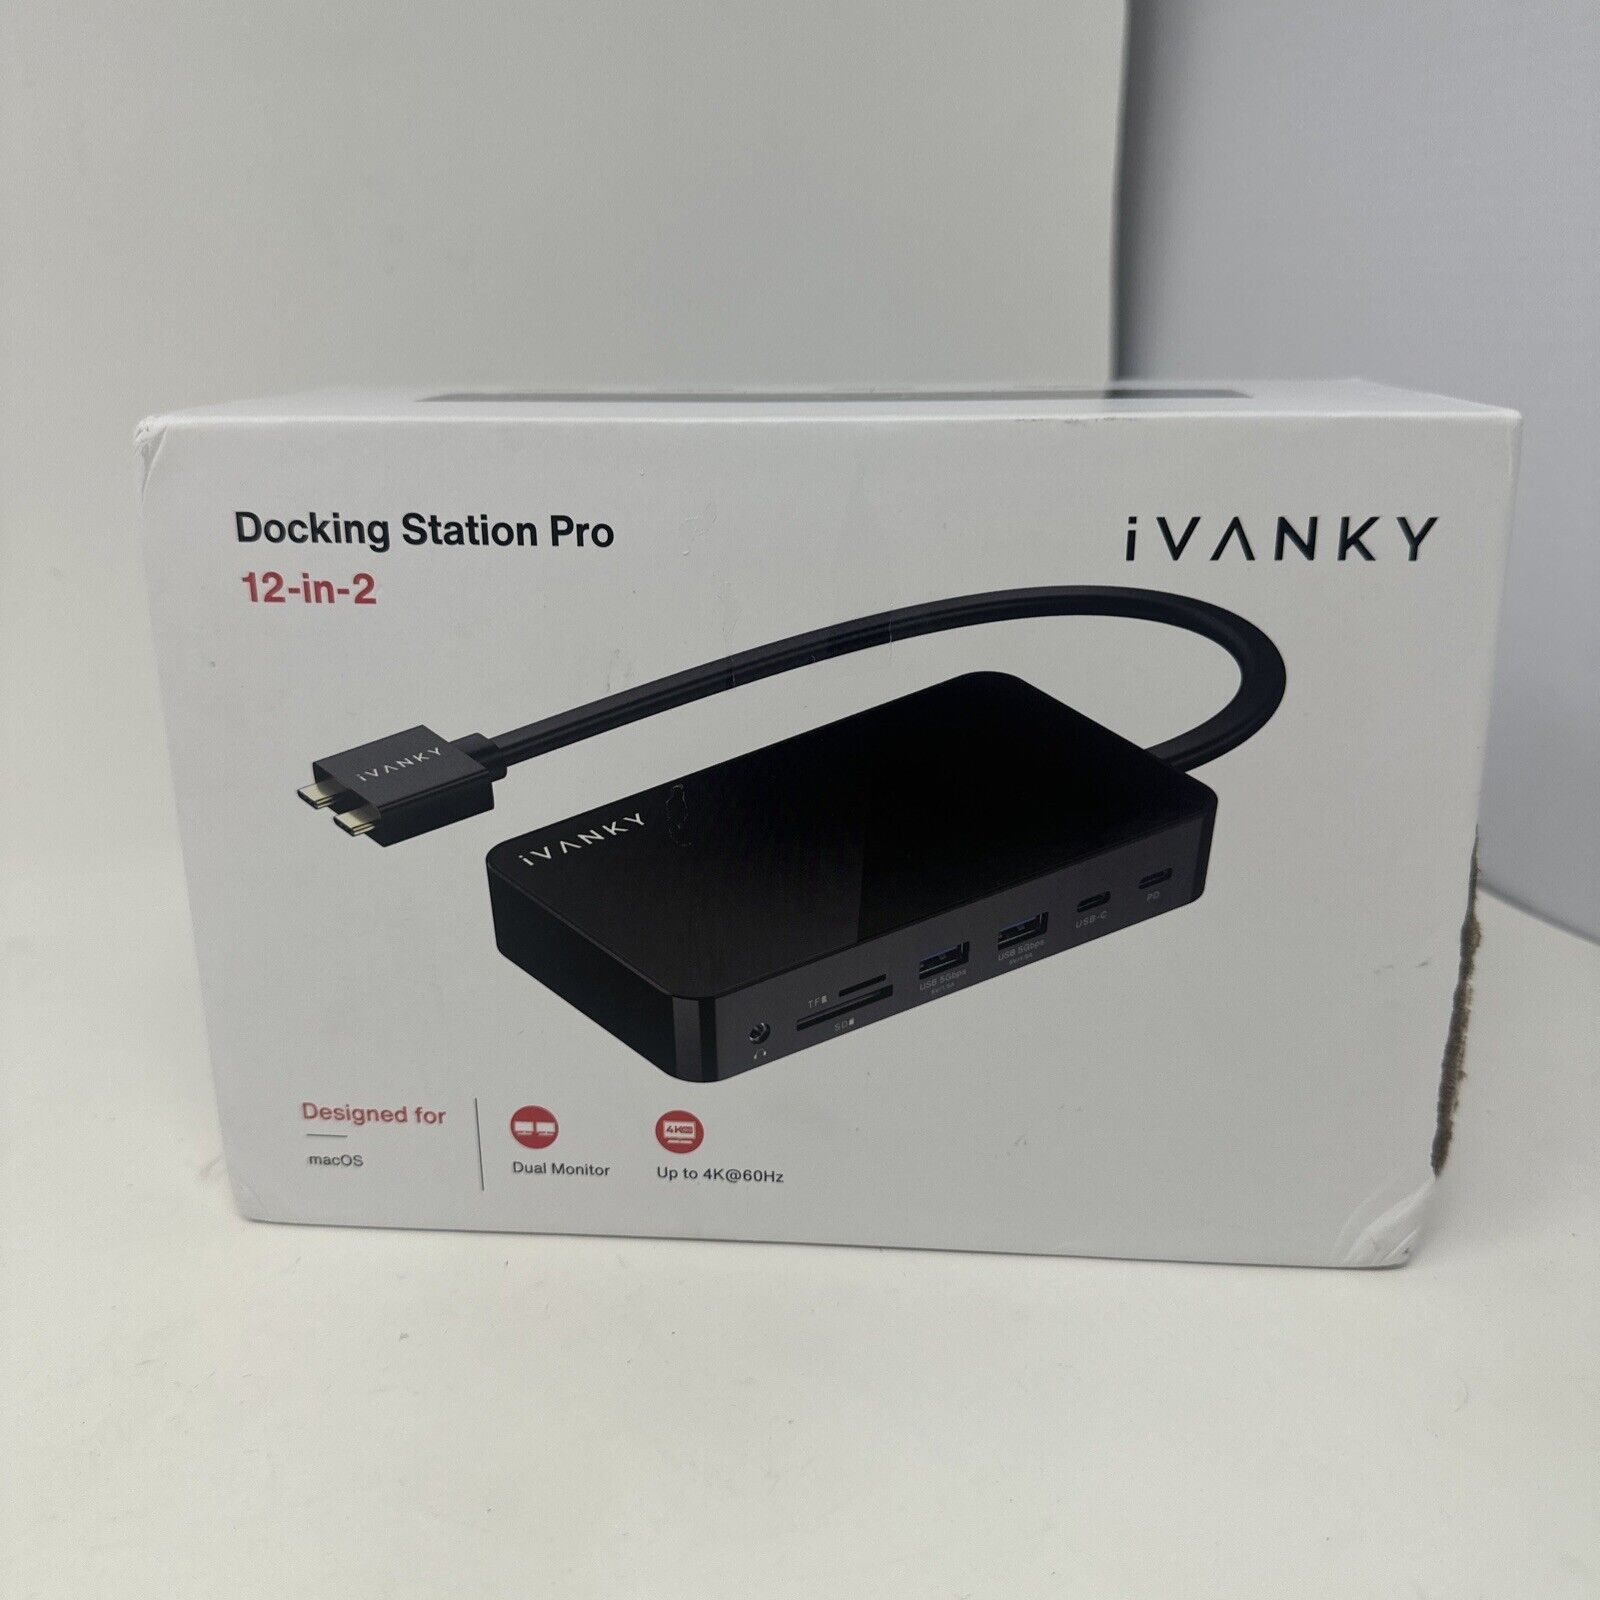 iVANKY FusionDock MacBook Docking Station Pro 12 In 1, with 150W Power Adapter